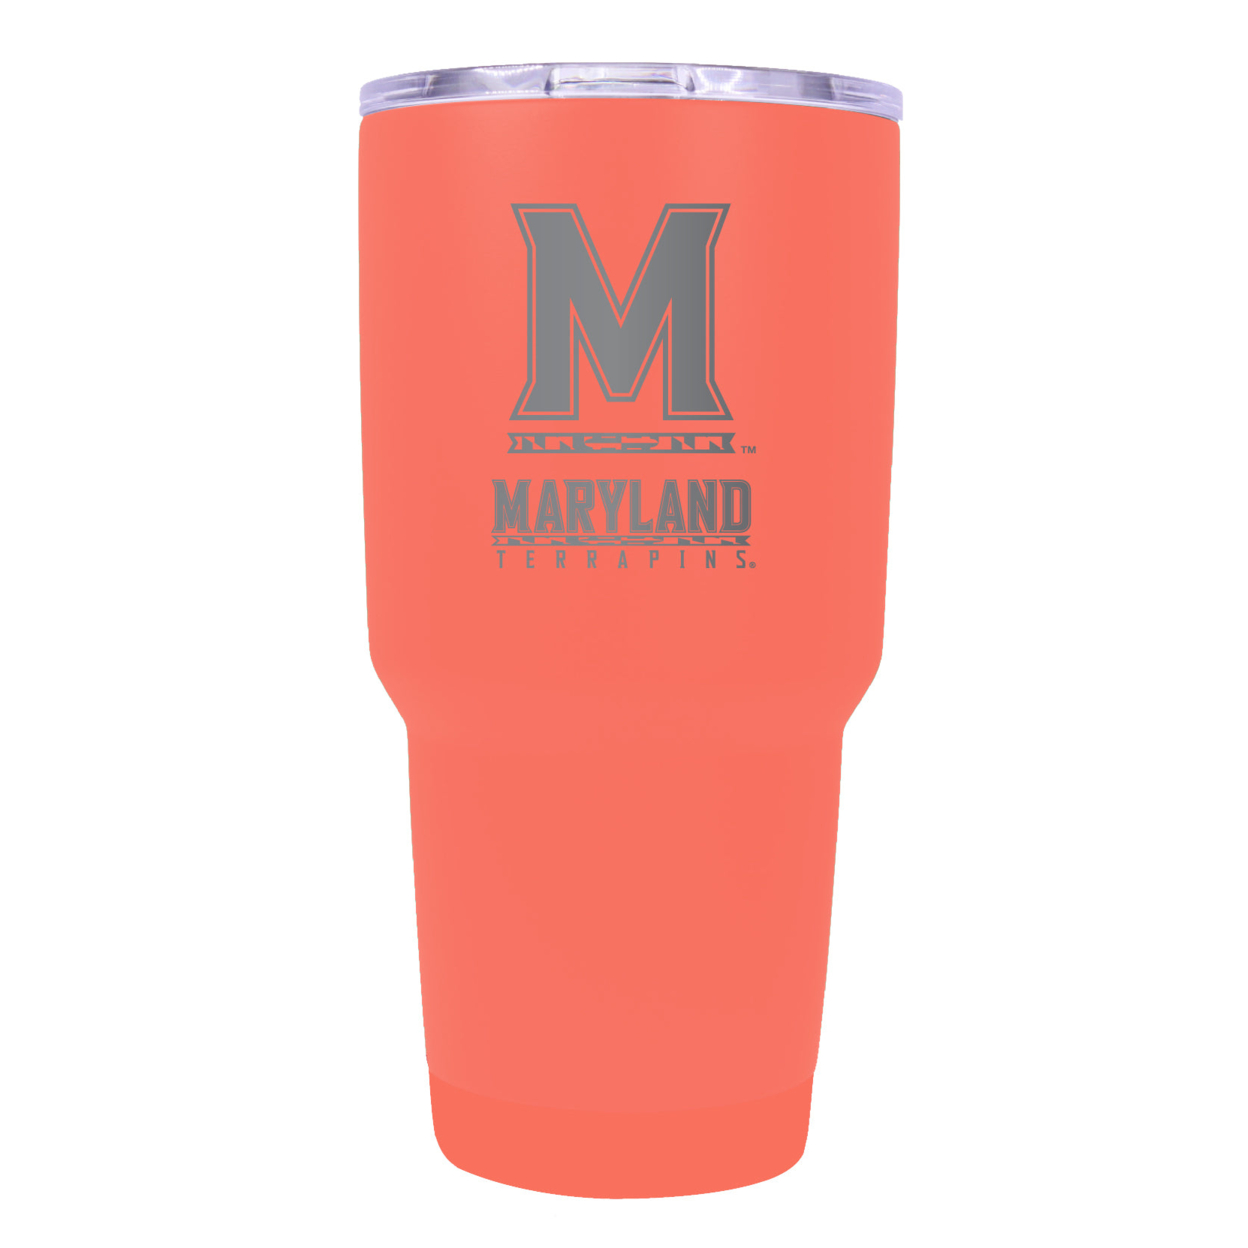 Maryland Terrapins 24 Oz Insulated Tumbler Etched - Choose Your Color - Coral